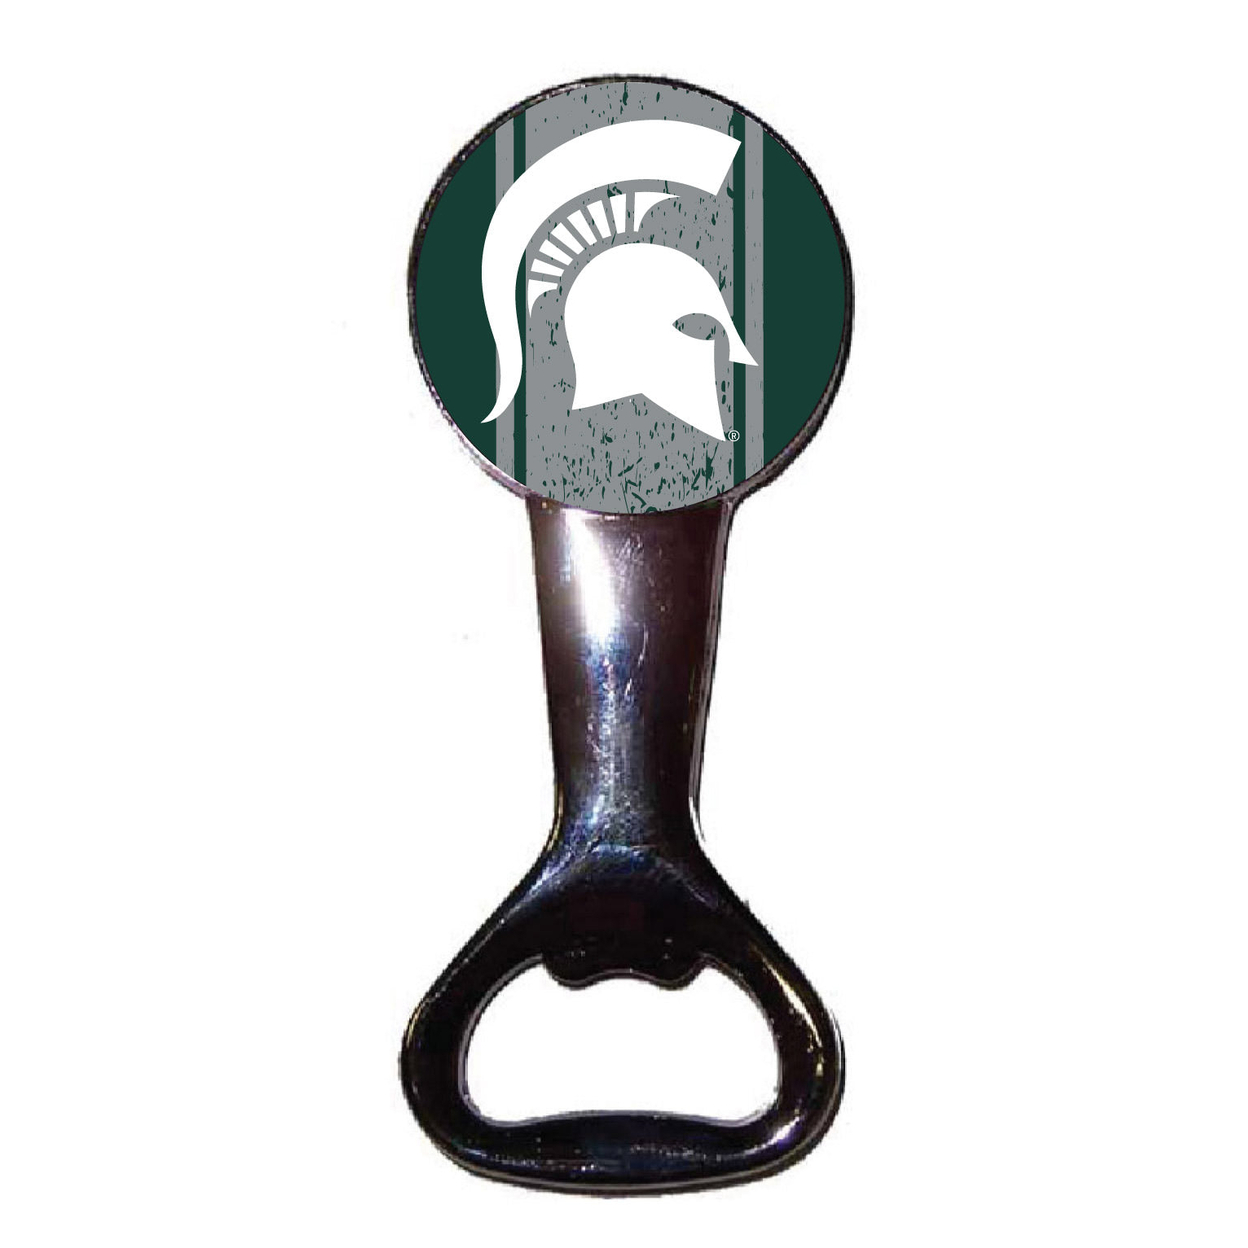 Michigan State Spartans Magnetic Bottle Opener